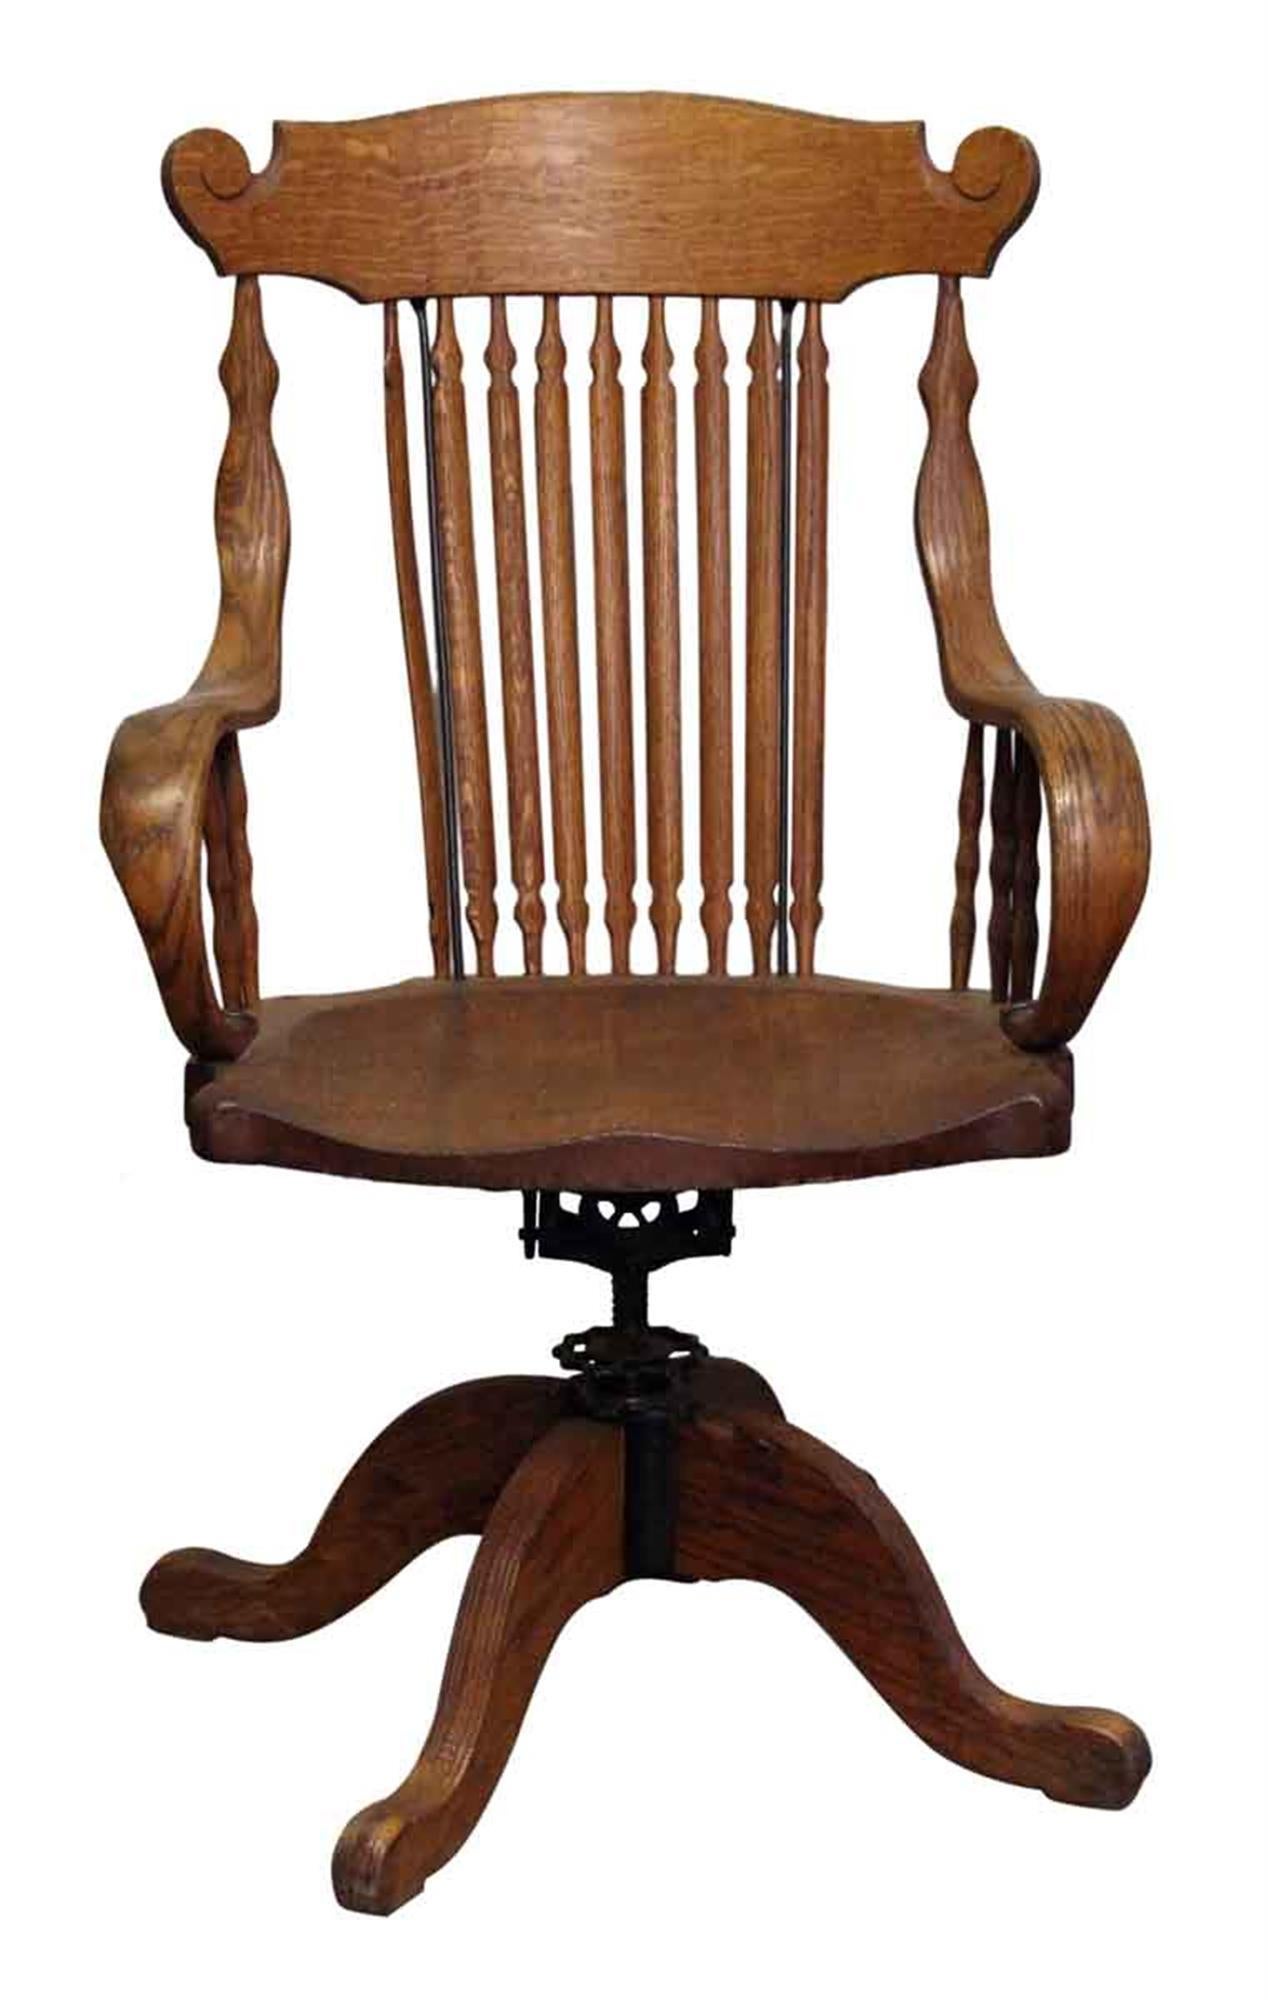 1920s beautifully carved tiger oak chair with a finely crafted spindle back and bentwood arms. This can be seen at our 302 Bowery location in Manhattan.